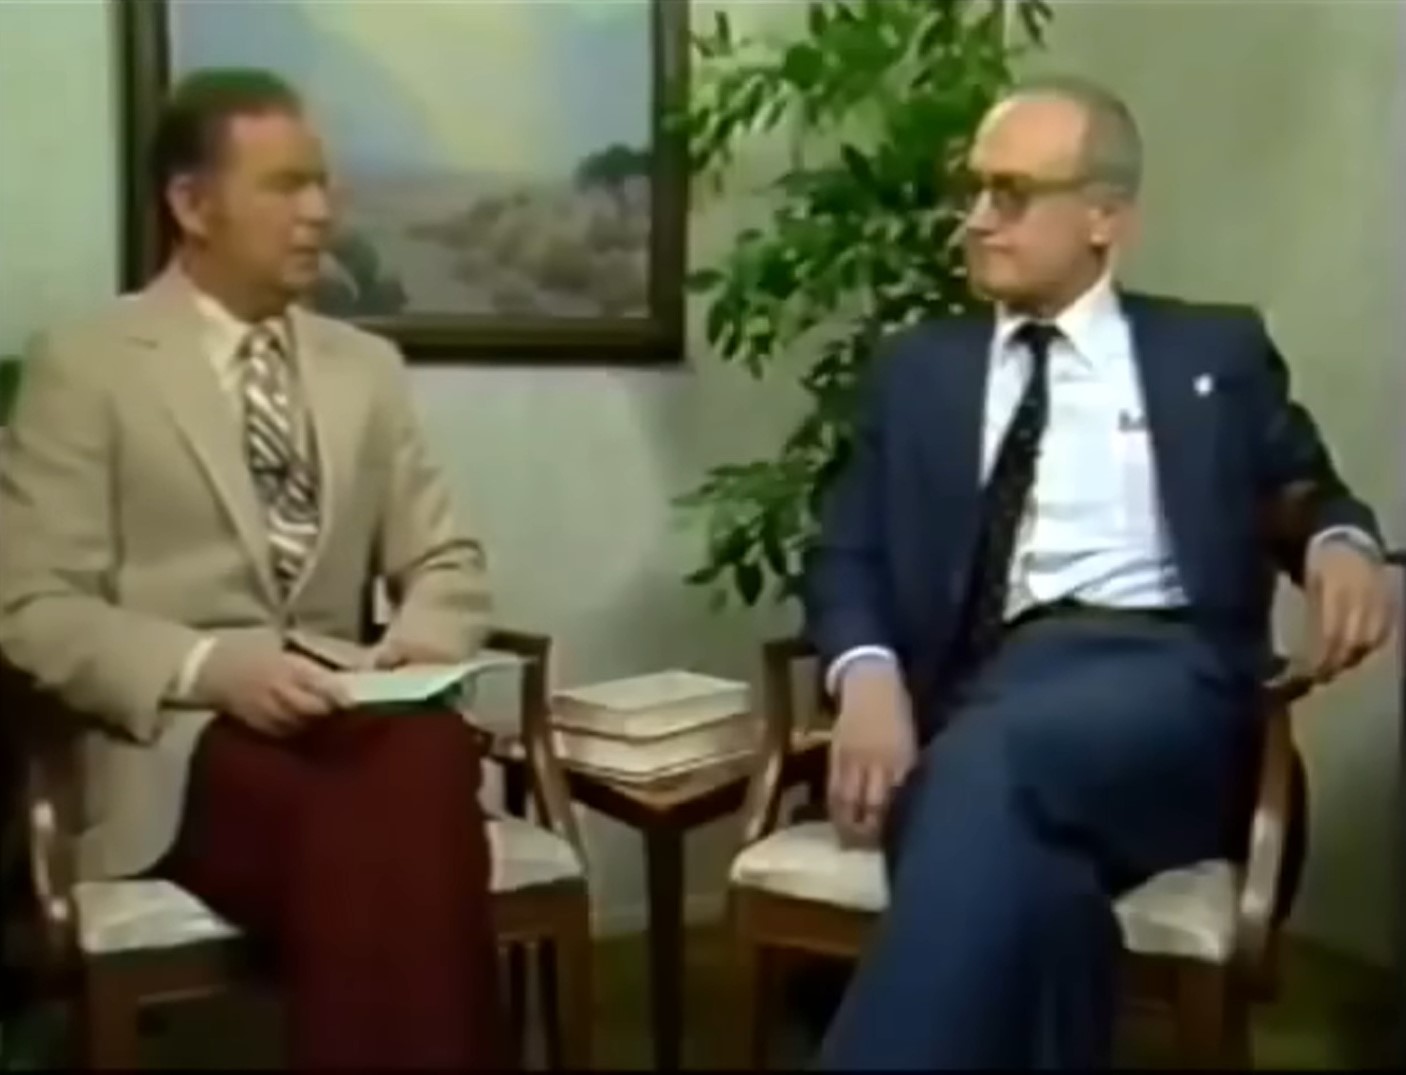 KGB defector's warning to America 40 years ago rings true today